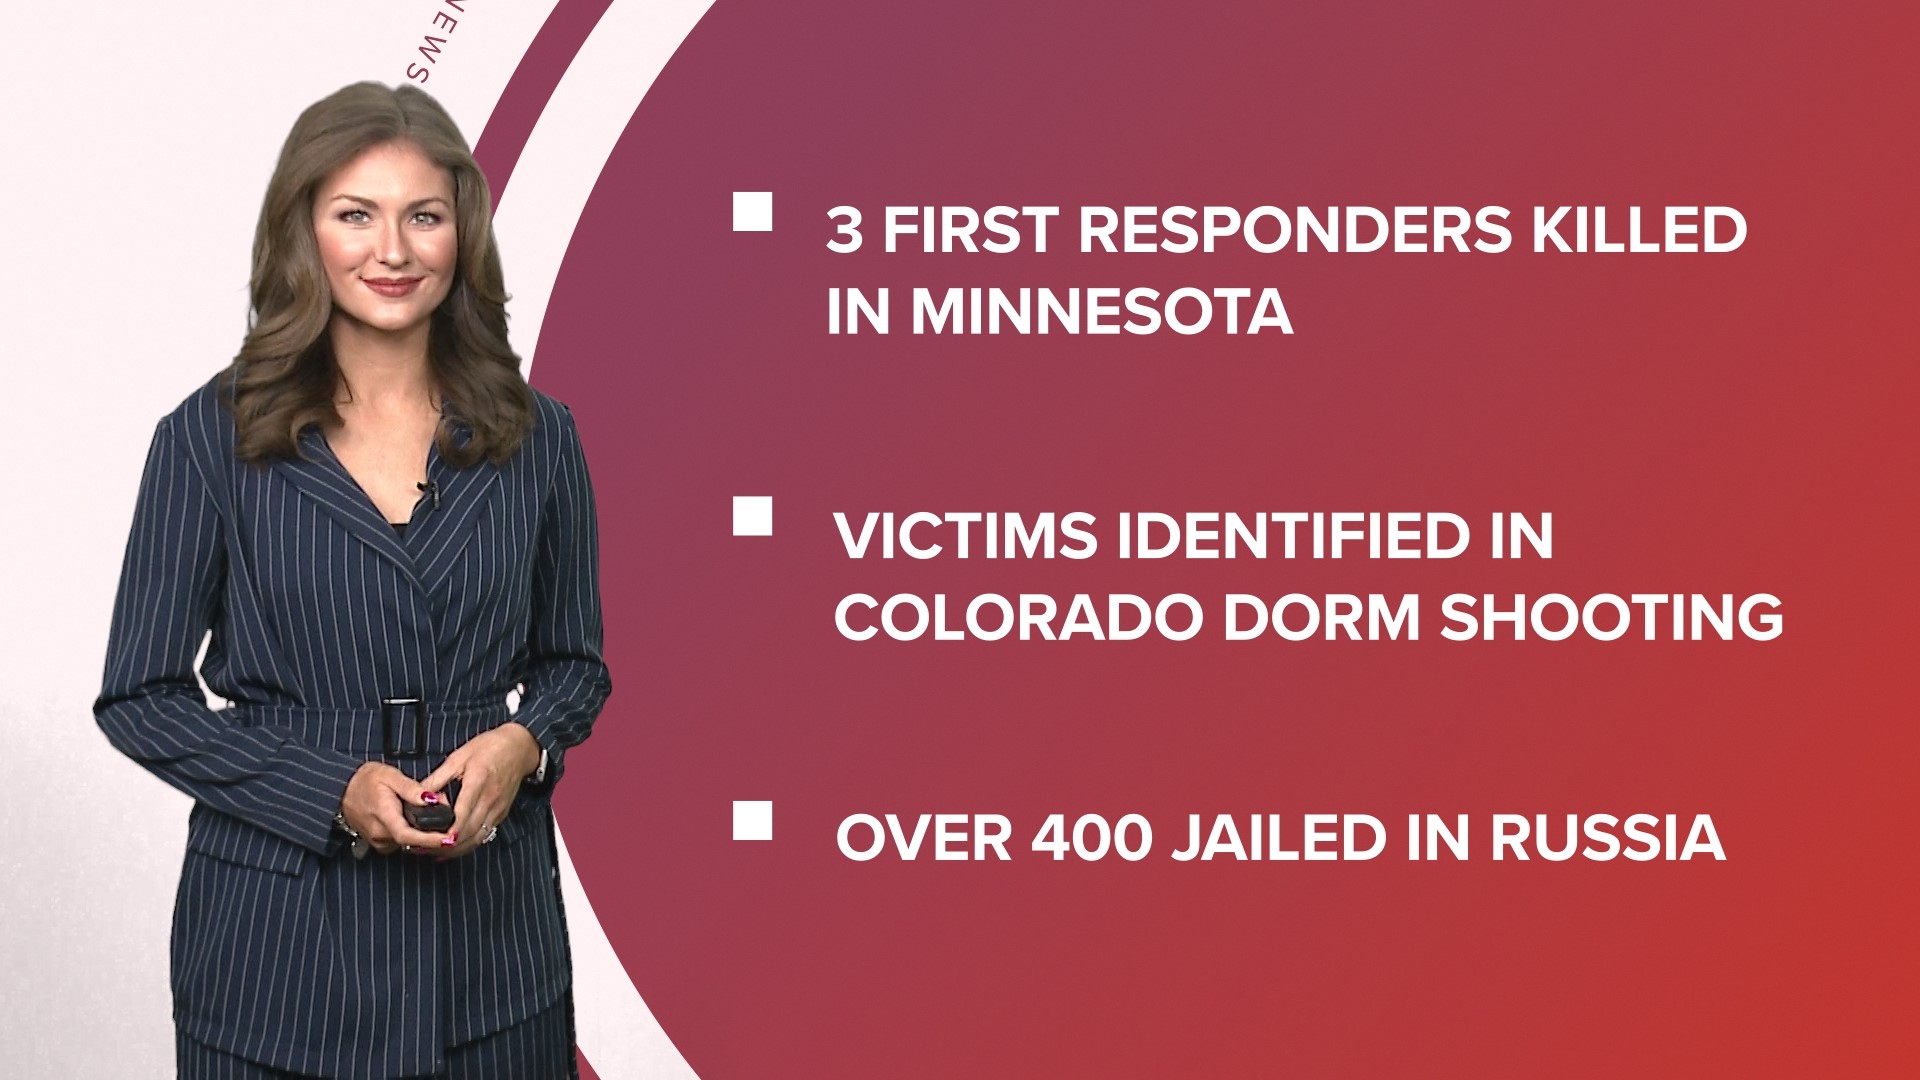 A look at what is happening in the news from 3 first responders killed during a domestic abuse call in Minnesota to a new Coca-Cola flavor and more.